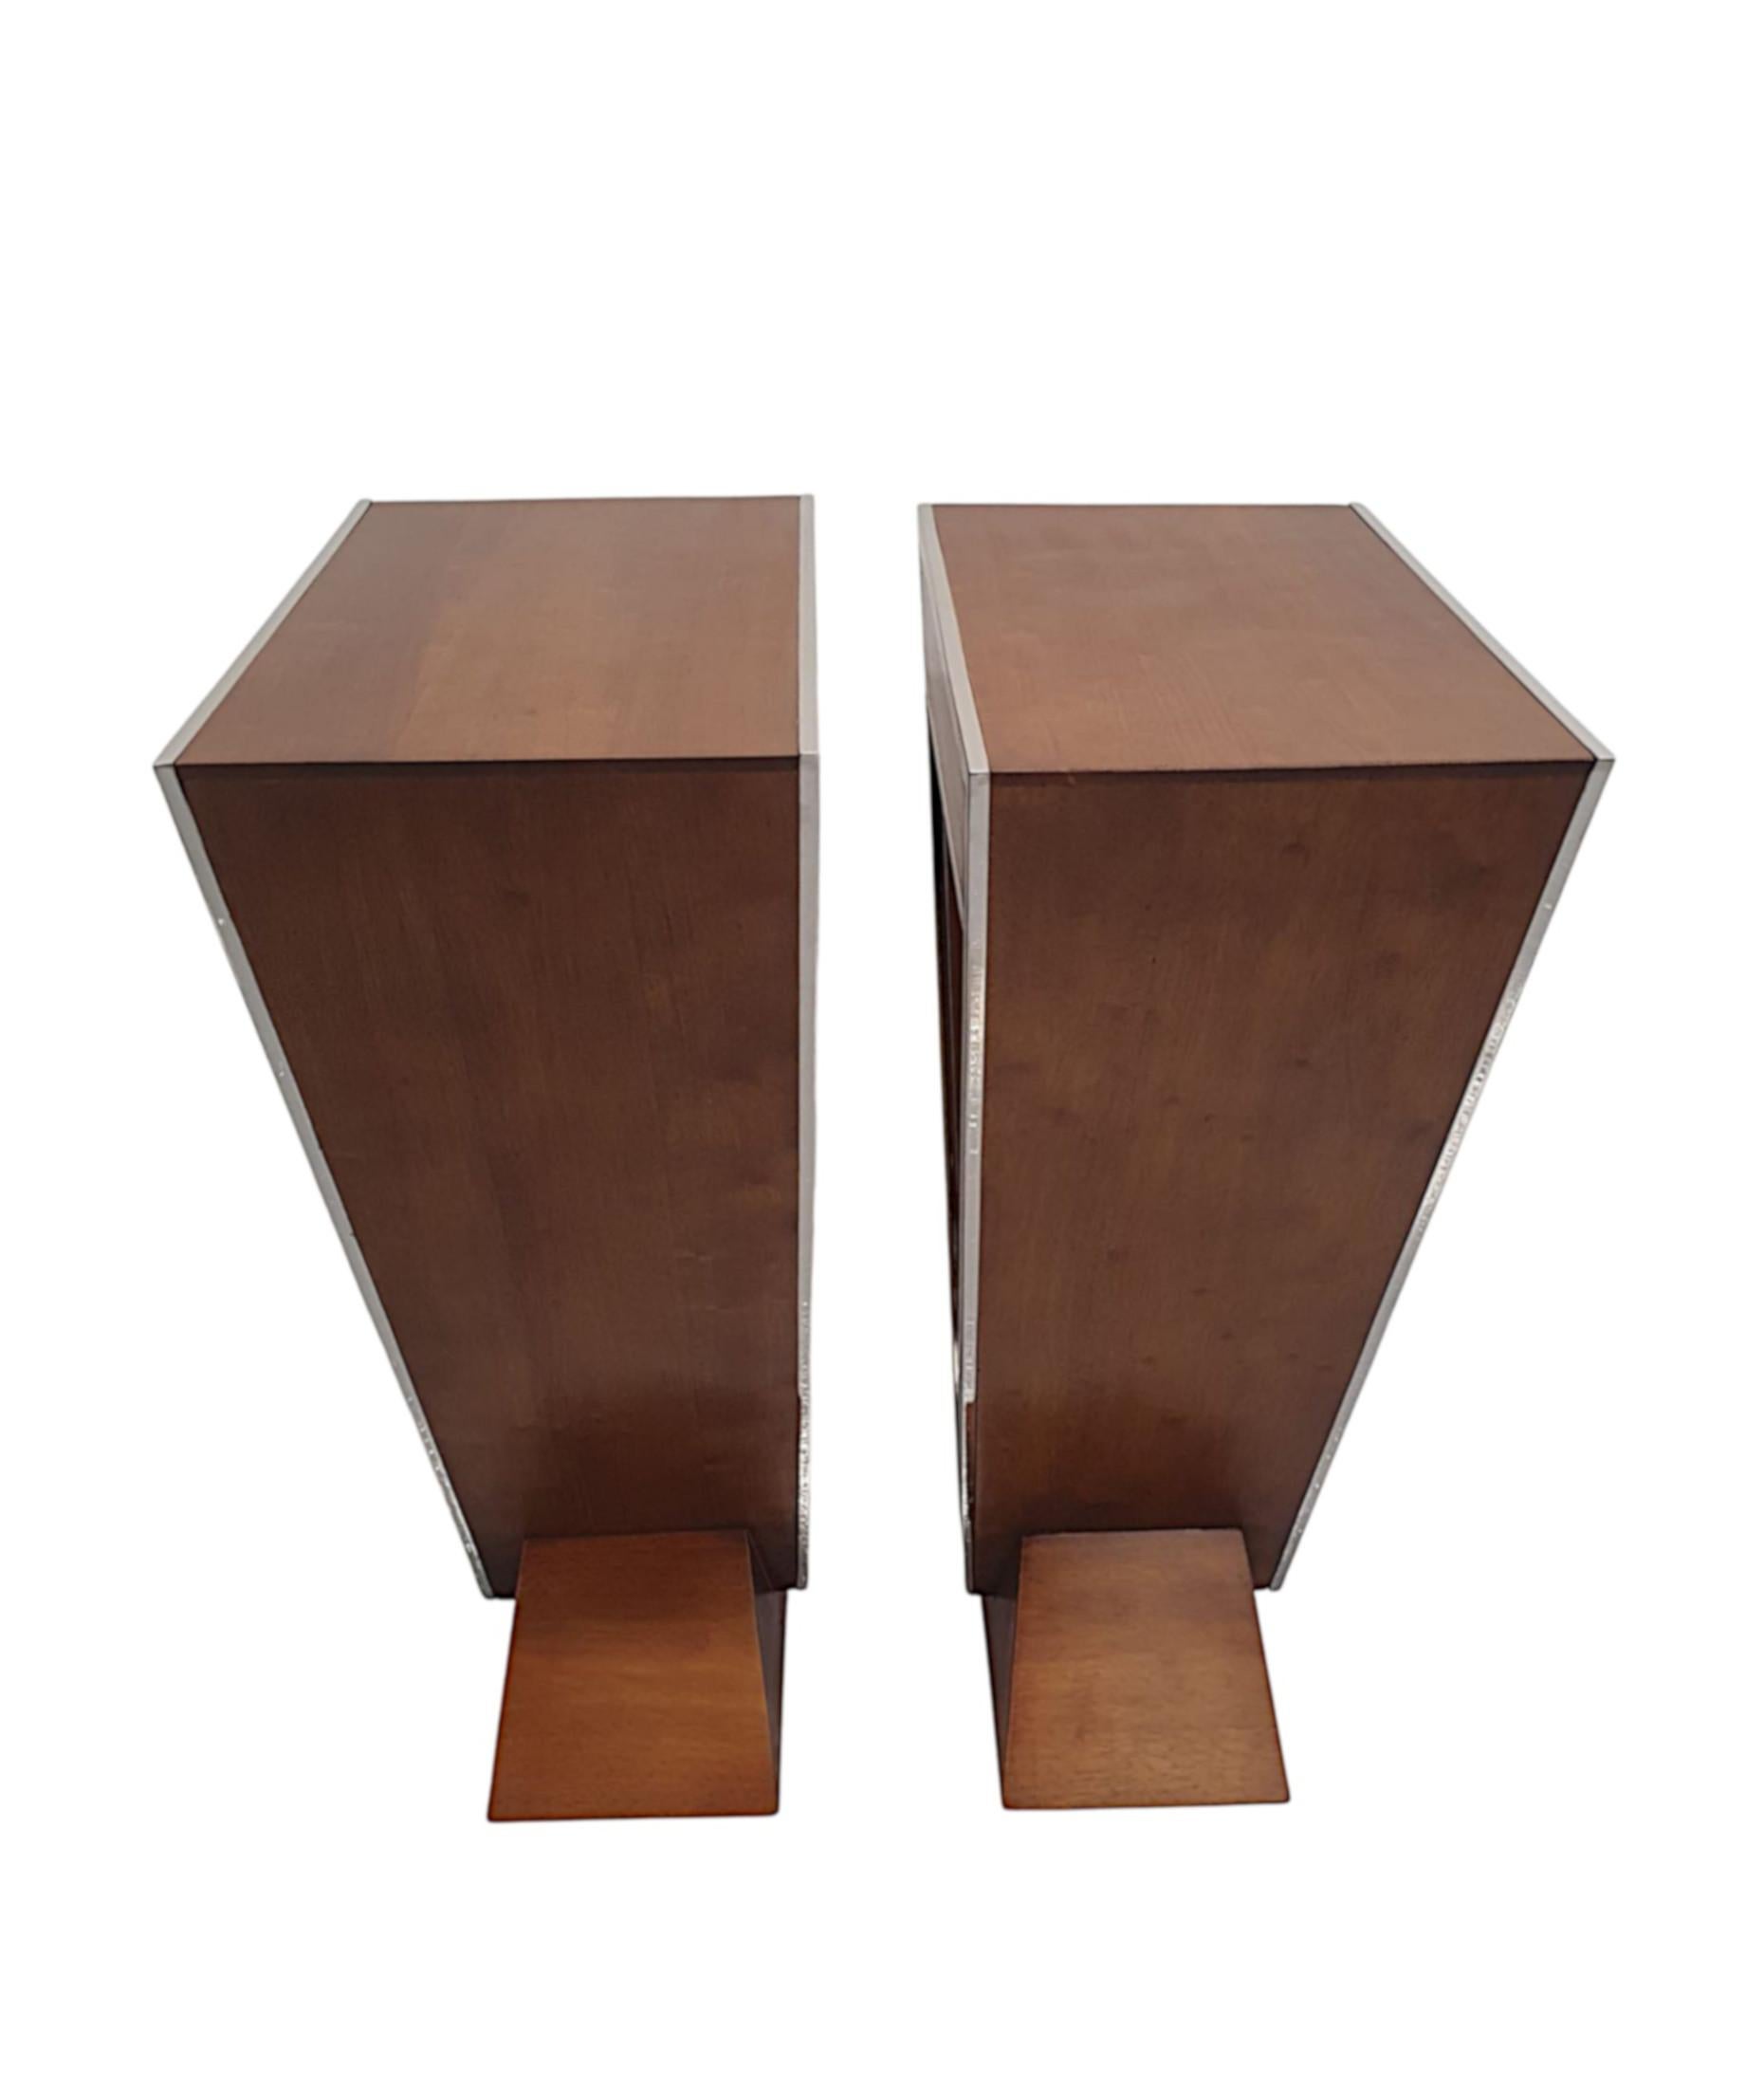 Contemporary  A Stunning Pair of Cherrywood and Chrome Side Tables in the Art Deco Style For Sale